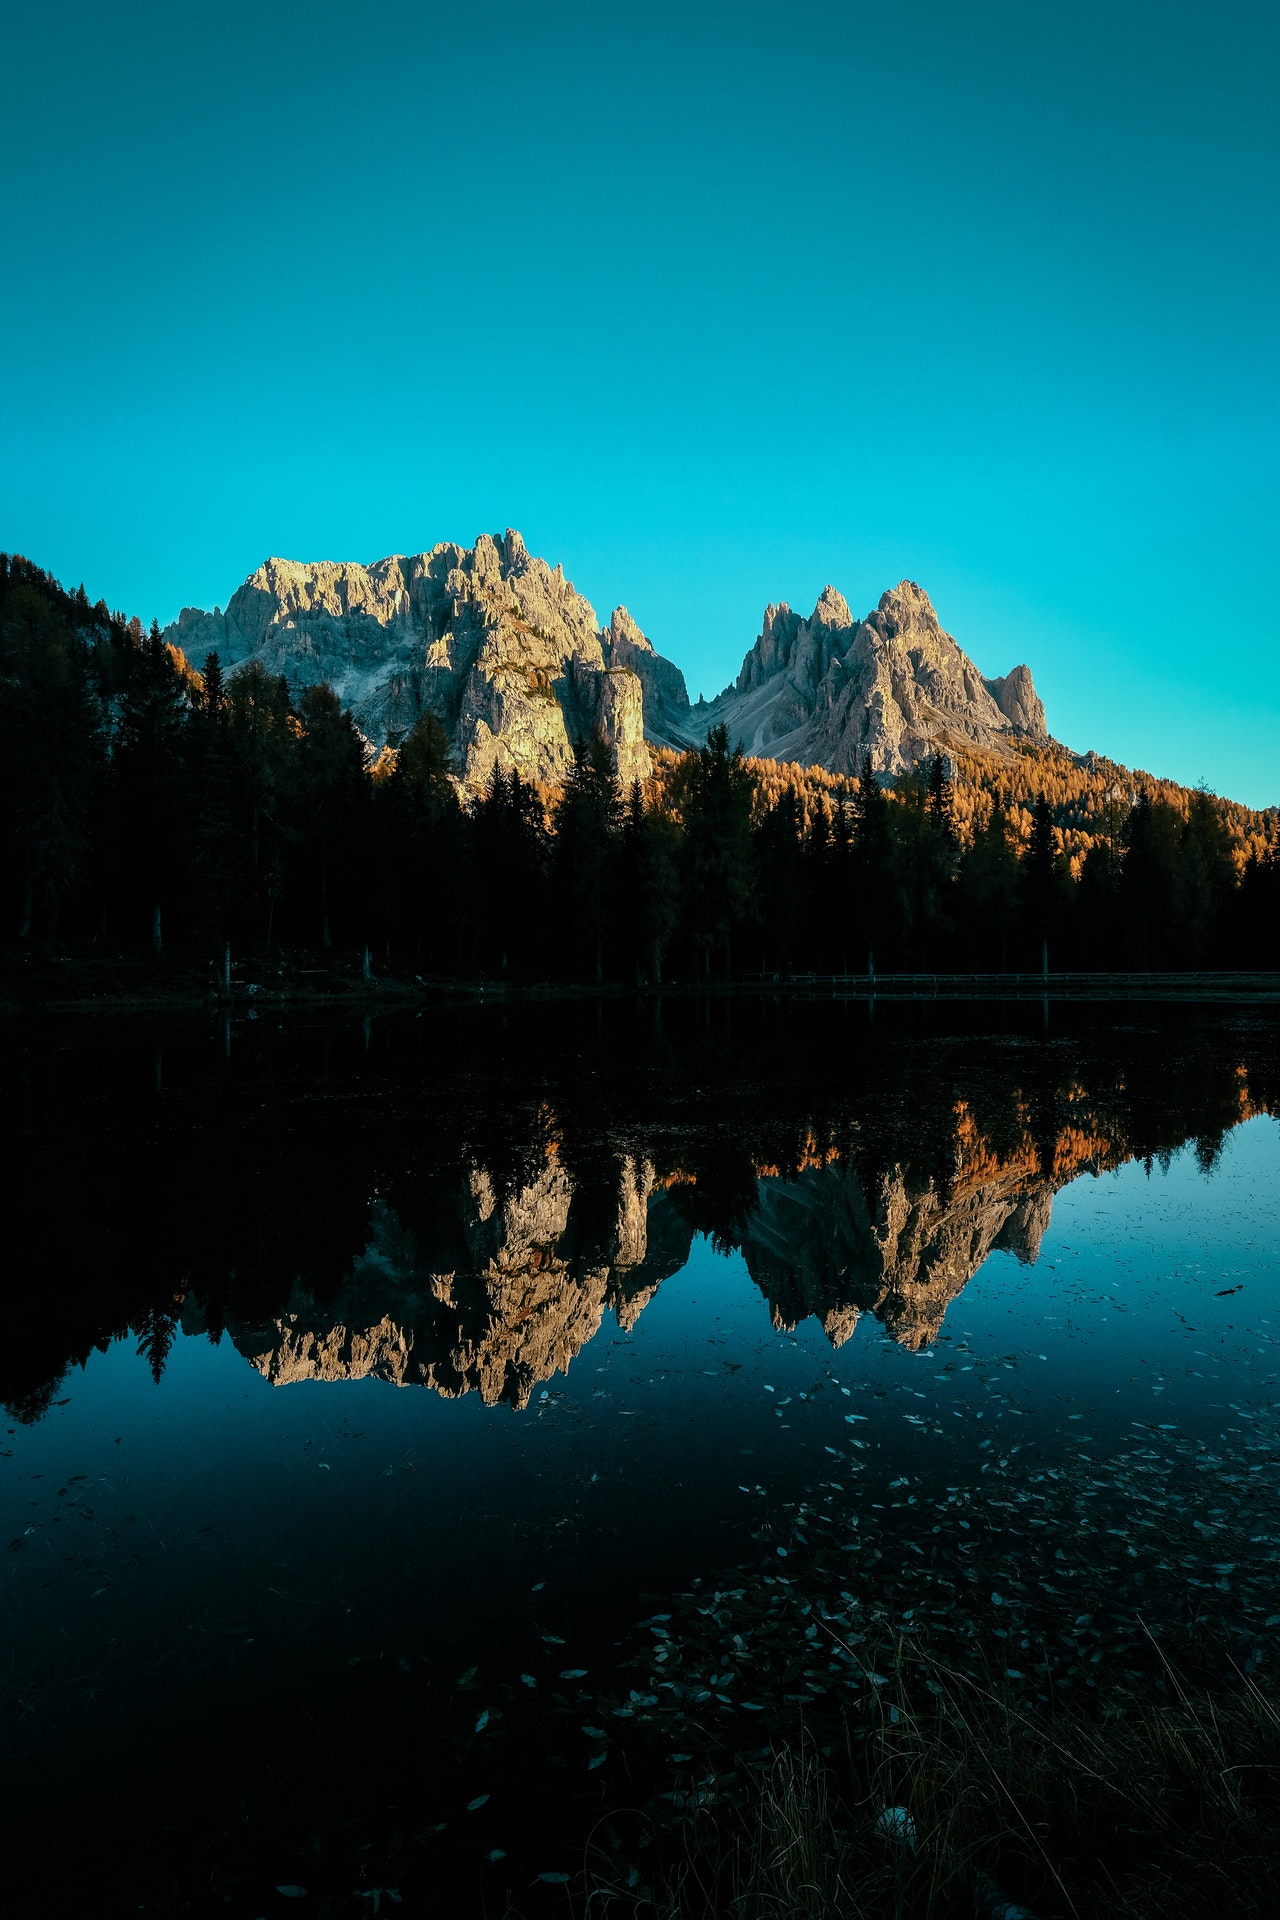 A Vision of Beauty – Lake and Mountain.